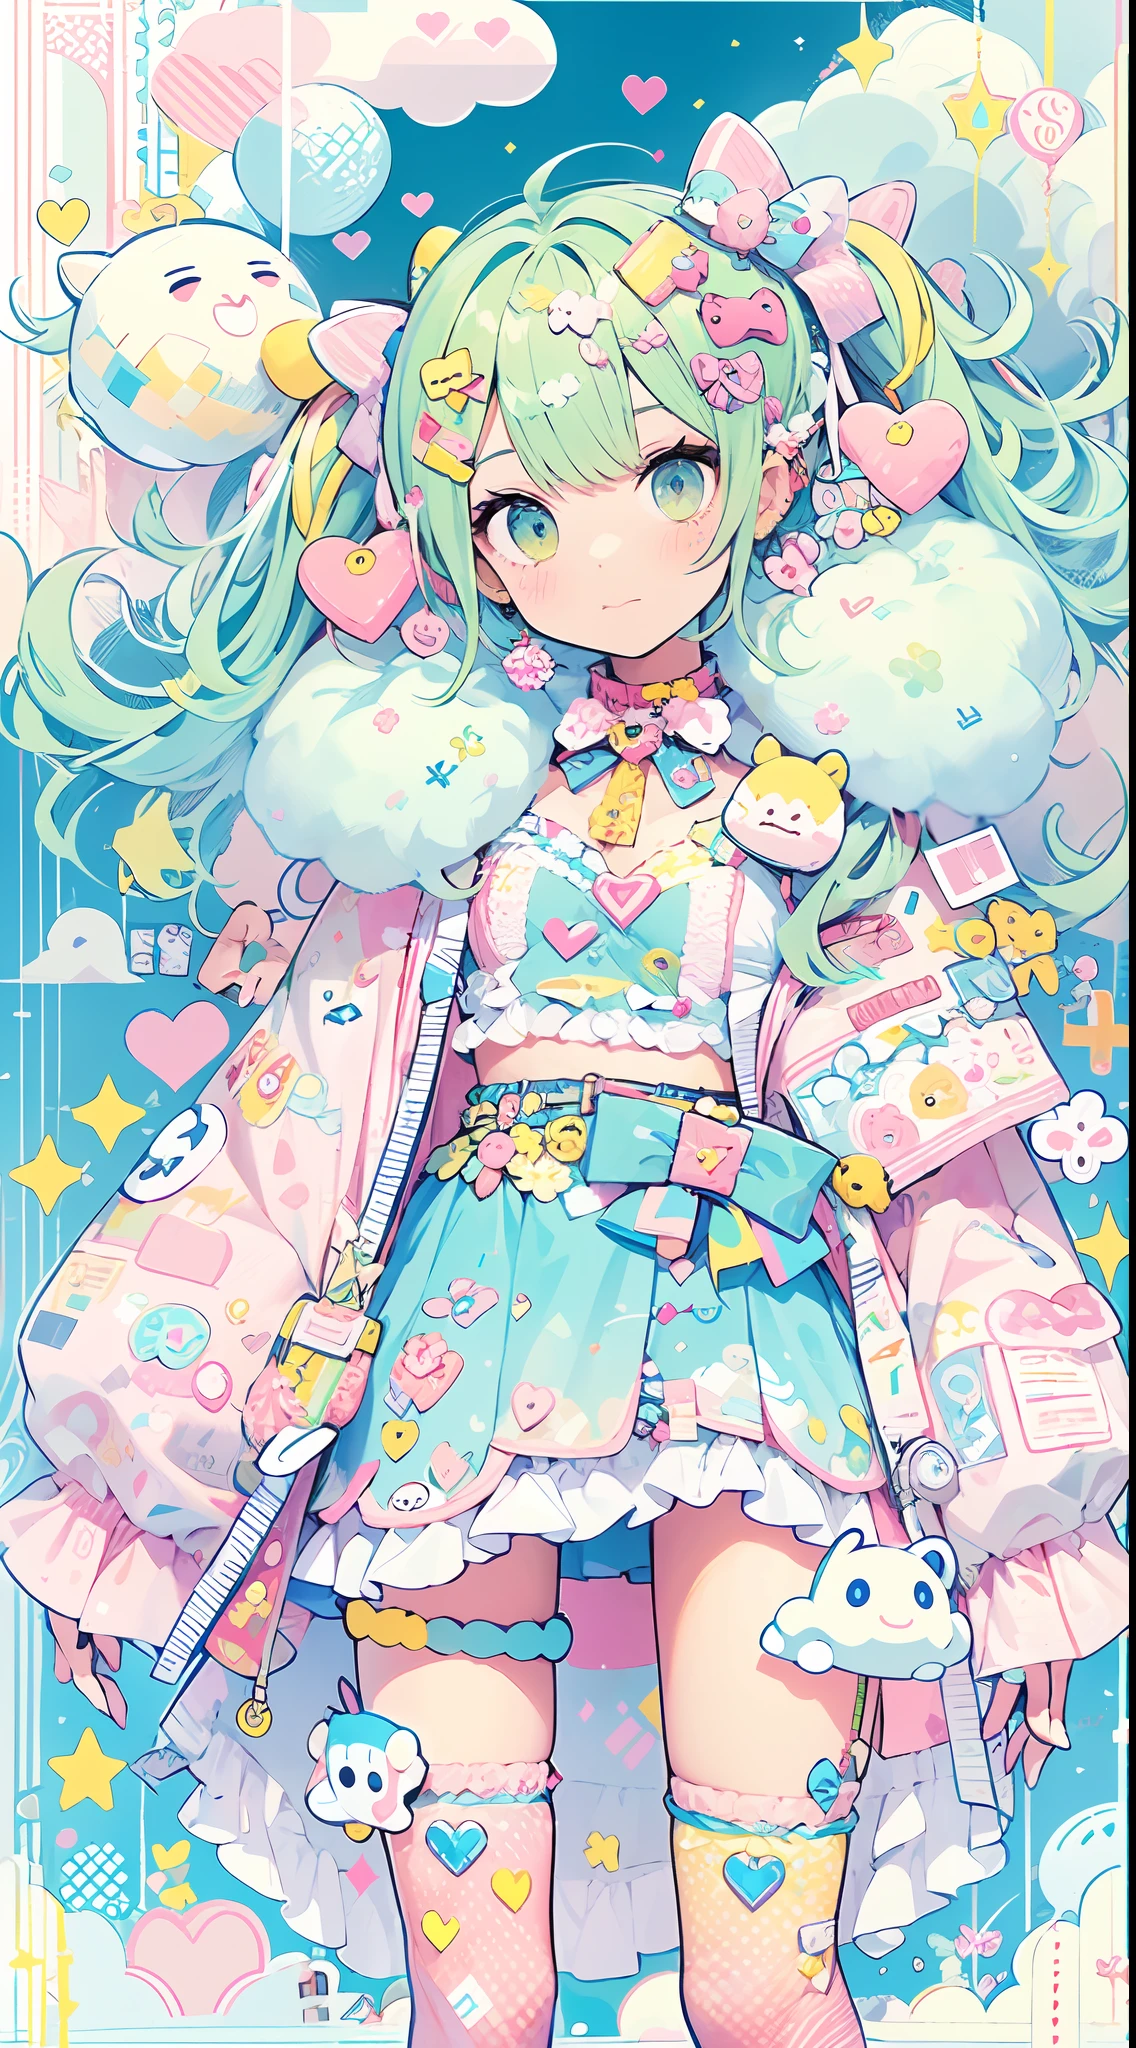 "kawaii, cute, adorable girl with pink, yellow, and baby blue color scheme. She is dressed in sky-themed clothes made out of clouds and sky motifs. Her outfit is fluffy and soft, with decora accessories like hairclips. She embodies the vibrant and trendy Harajuku fashion style."